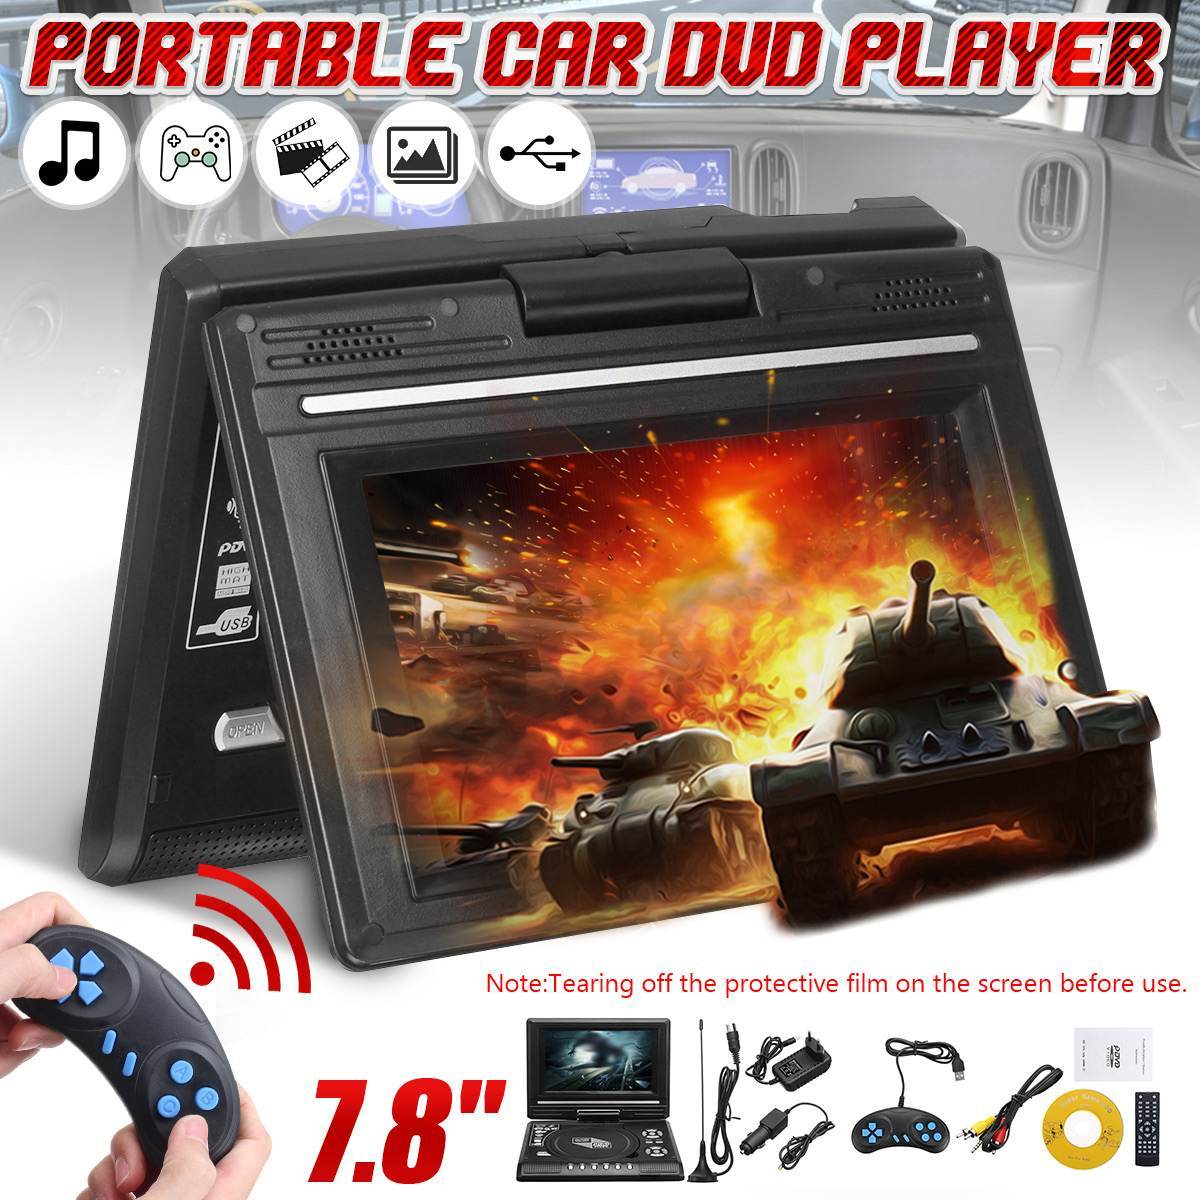 Portable 7.8 Inch HD TV Home Car DVD Player VCD CD MP3 DVD Player USB SD Cards RCA TV Portatil Cable Game 16:9 Rotate LCD Screen